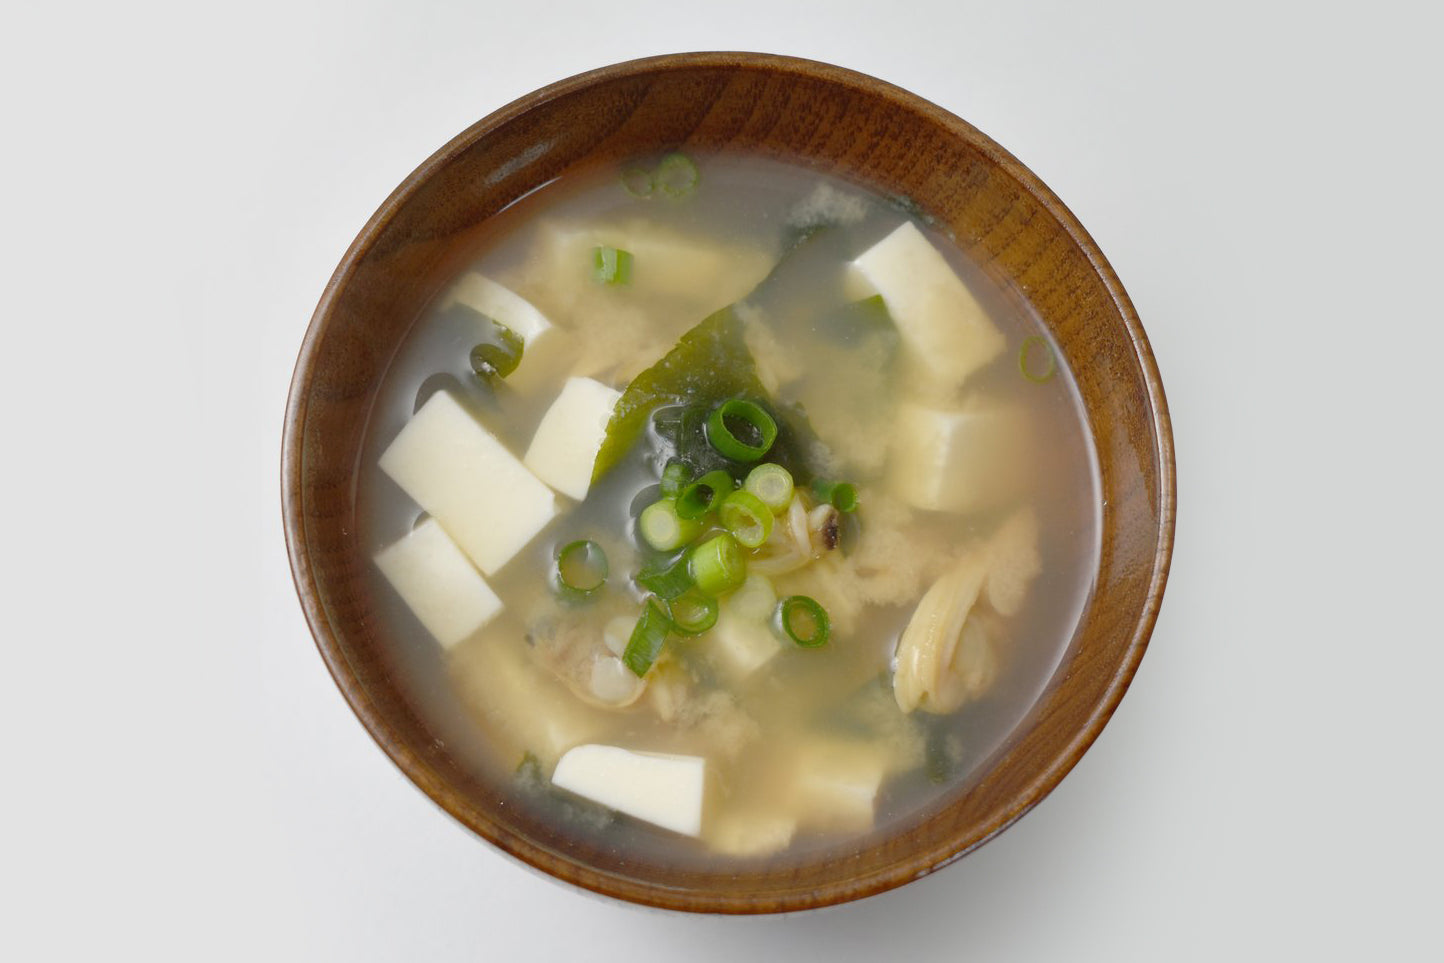 Healthy and Mouth-Watering Japanese Asari Miso Soup Recipe